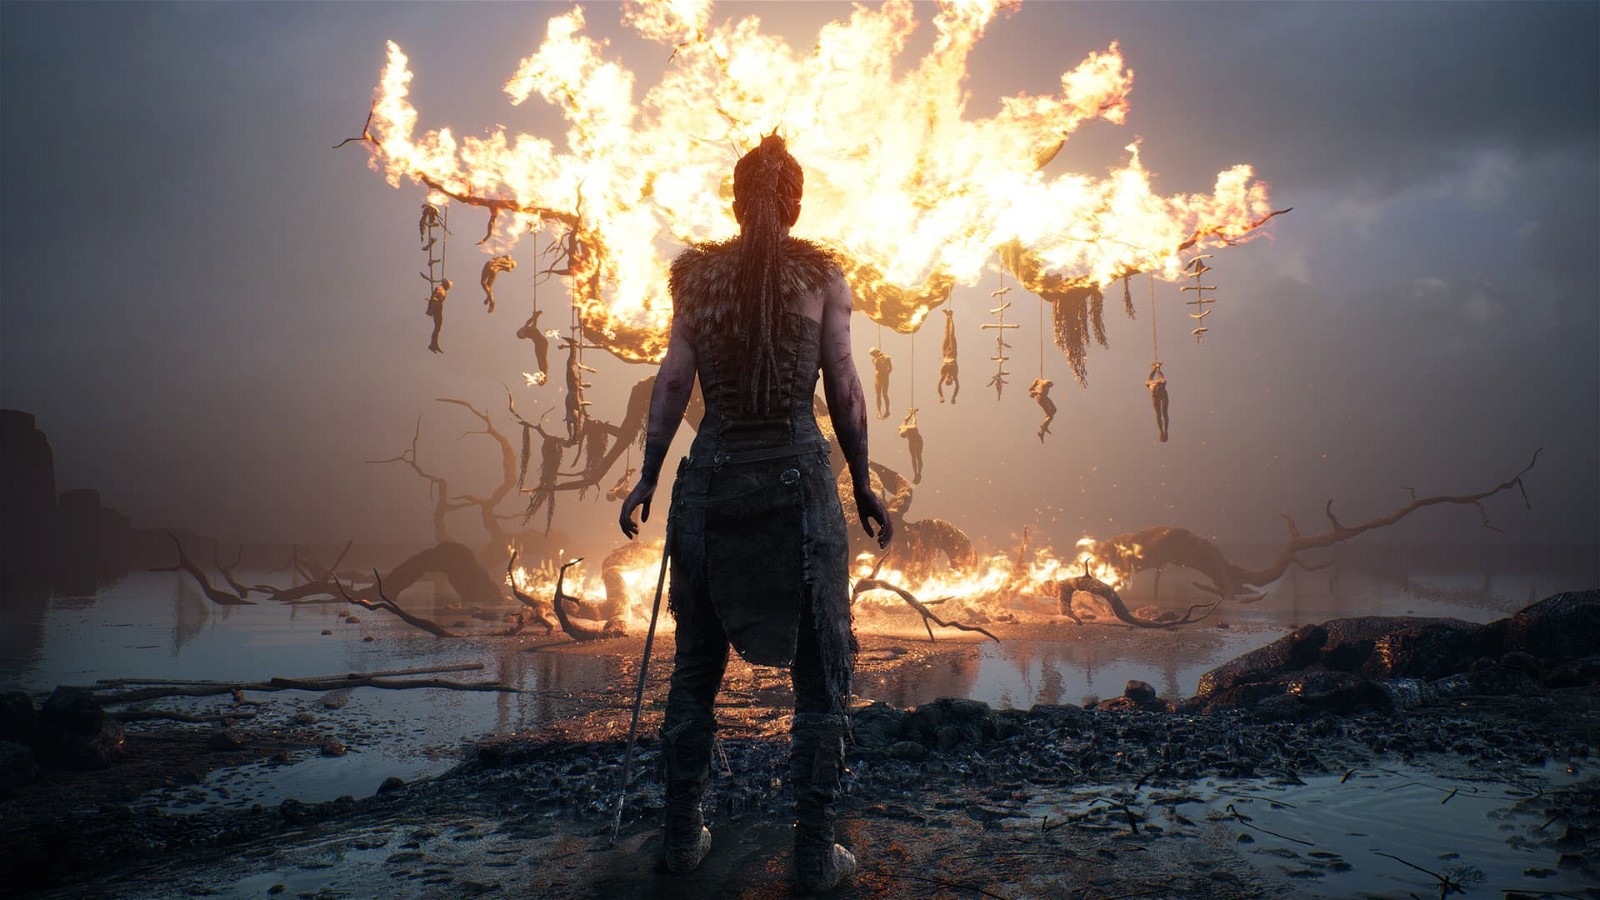 A still of the character looking at a burning tree in-game